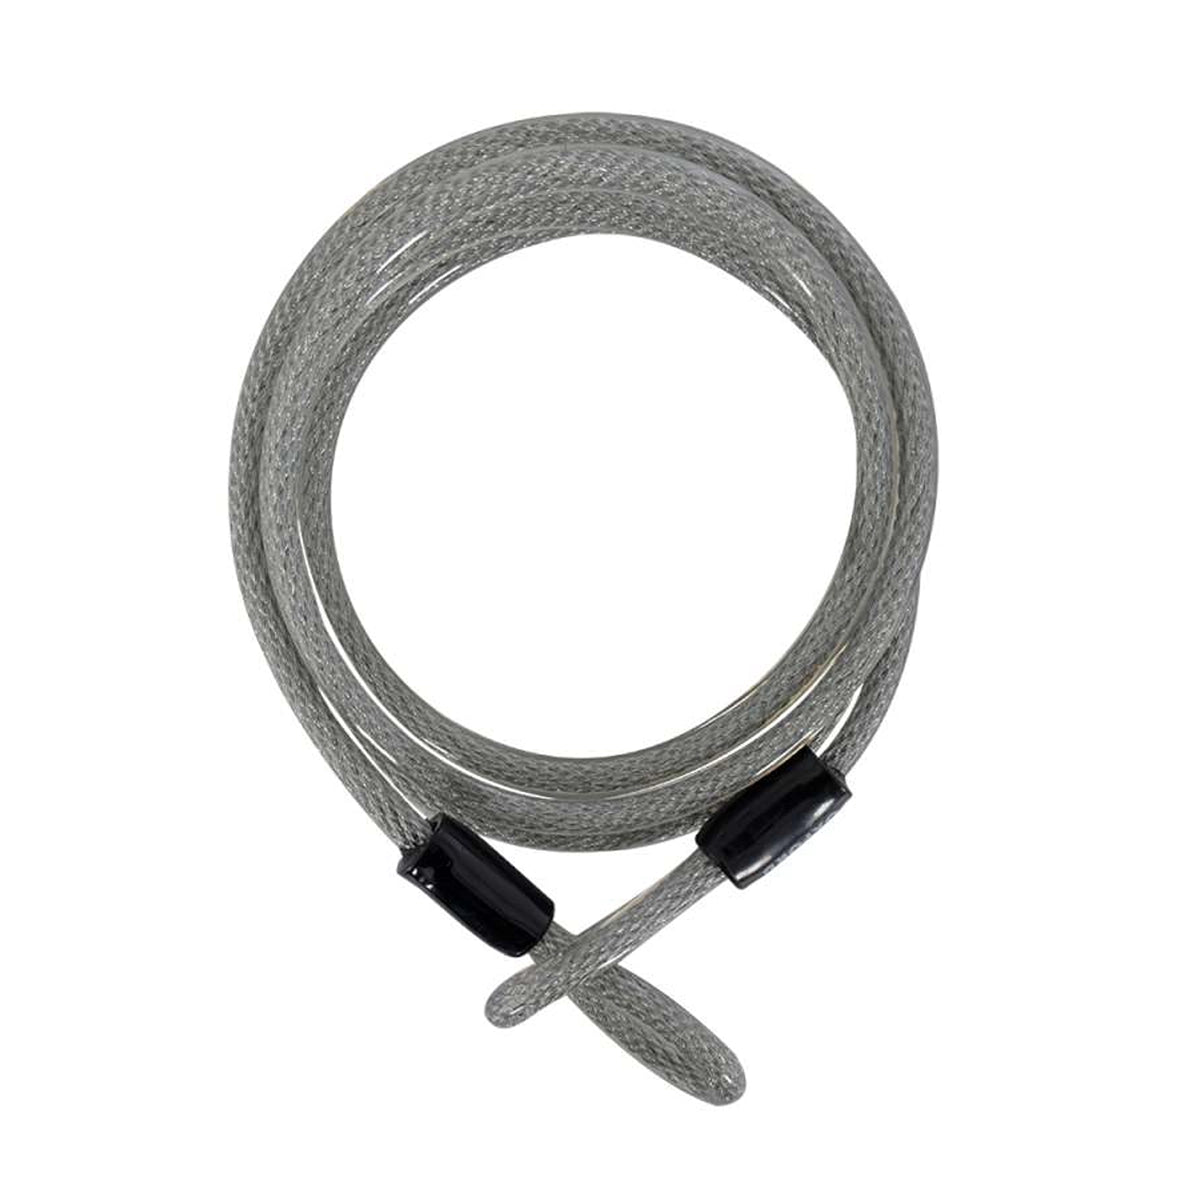 SAS LockMate 2500 x 12mm Steel Braided Cable